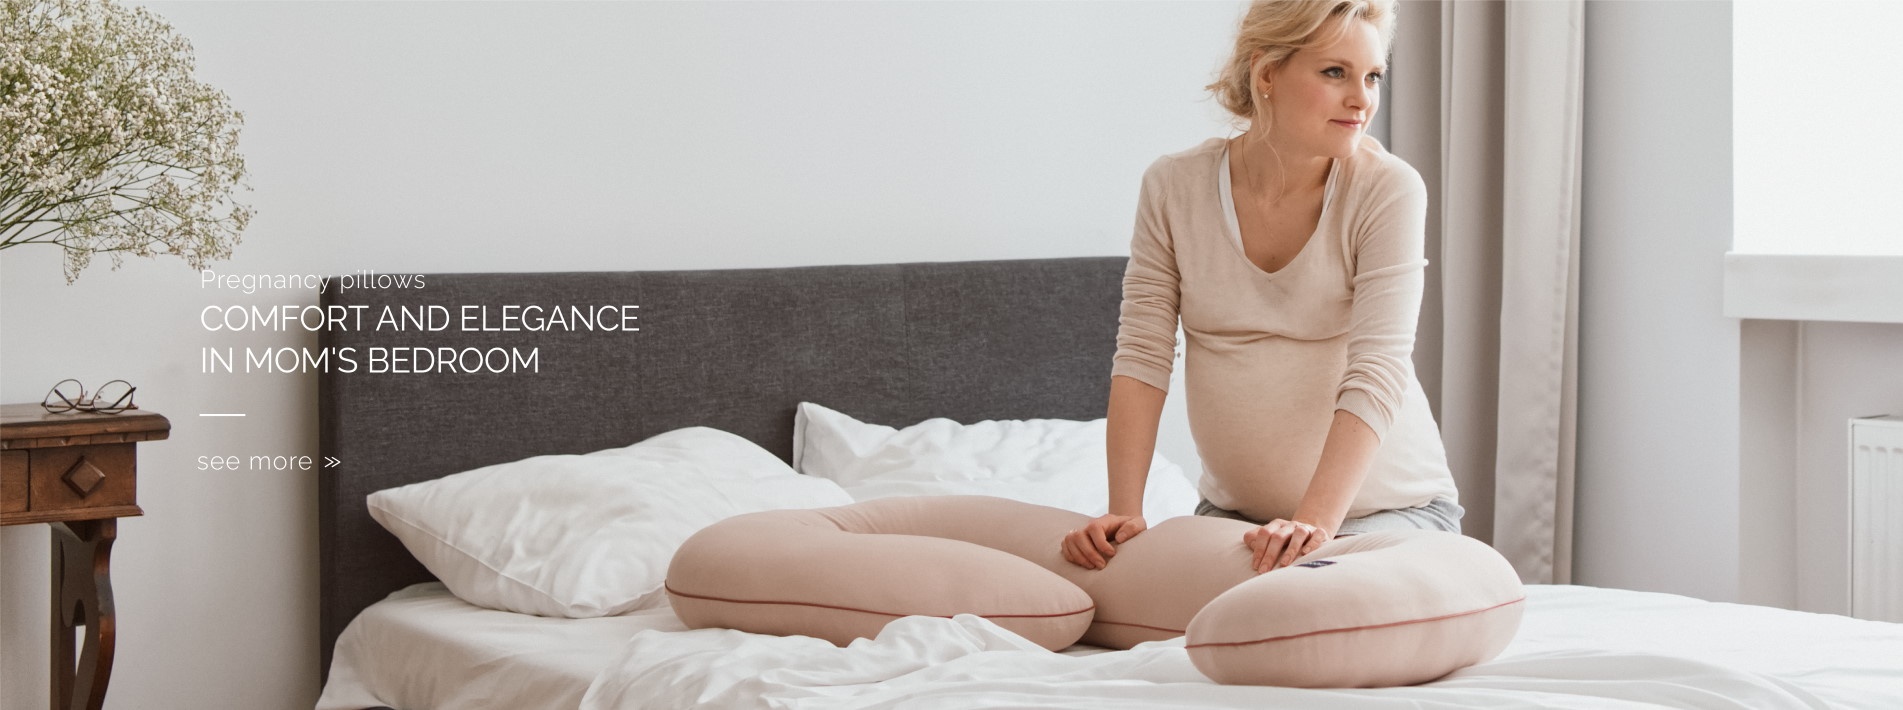 Comfort and elegance in Mom's bedroom - pregnancy pillows